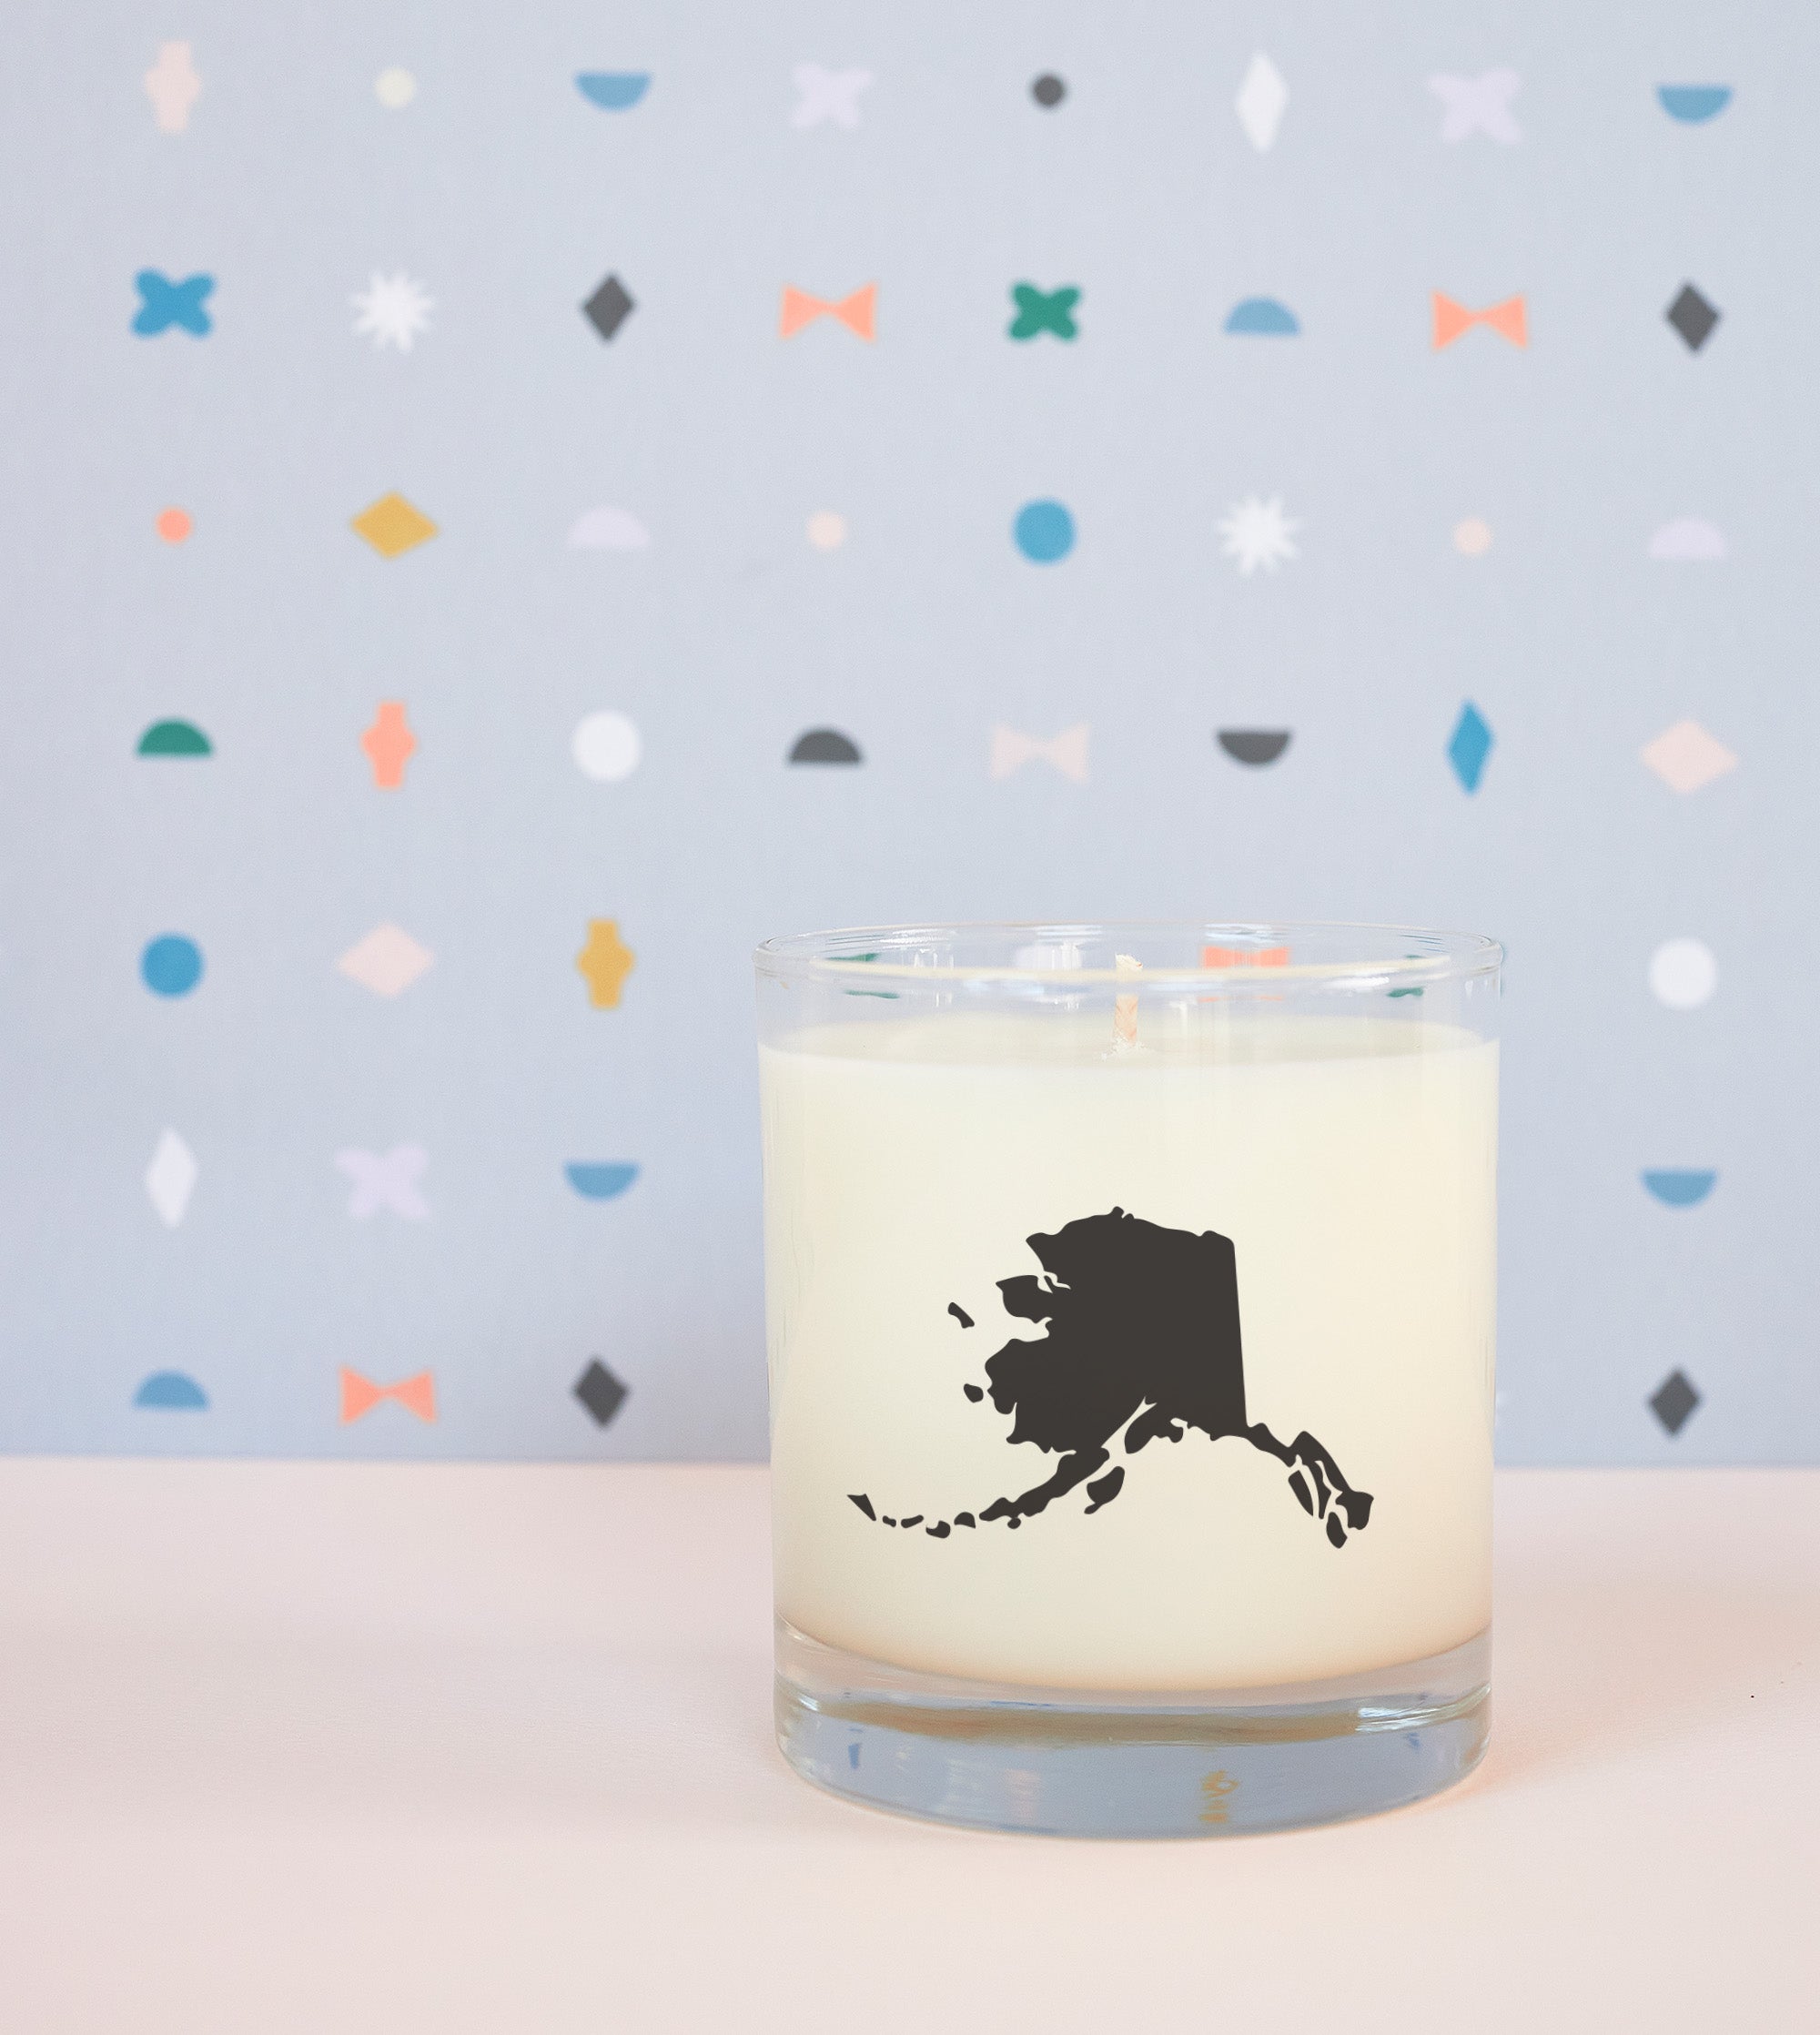 Alaska State Soy Candle